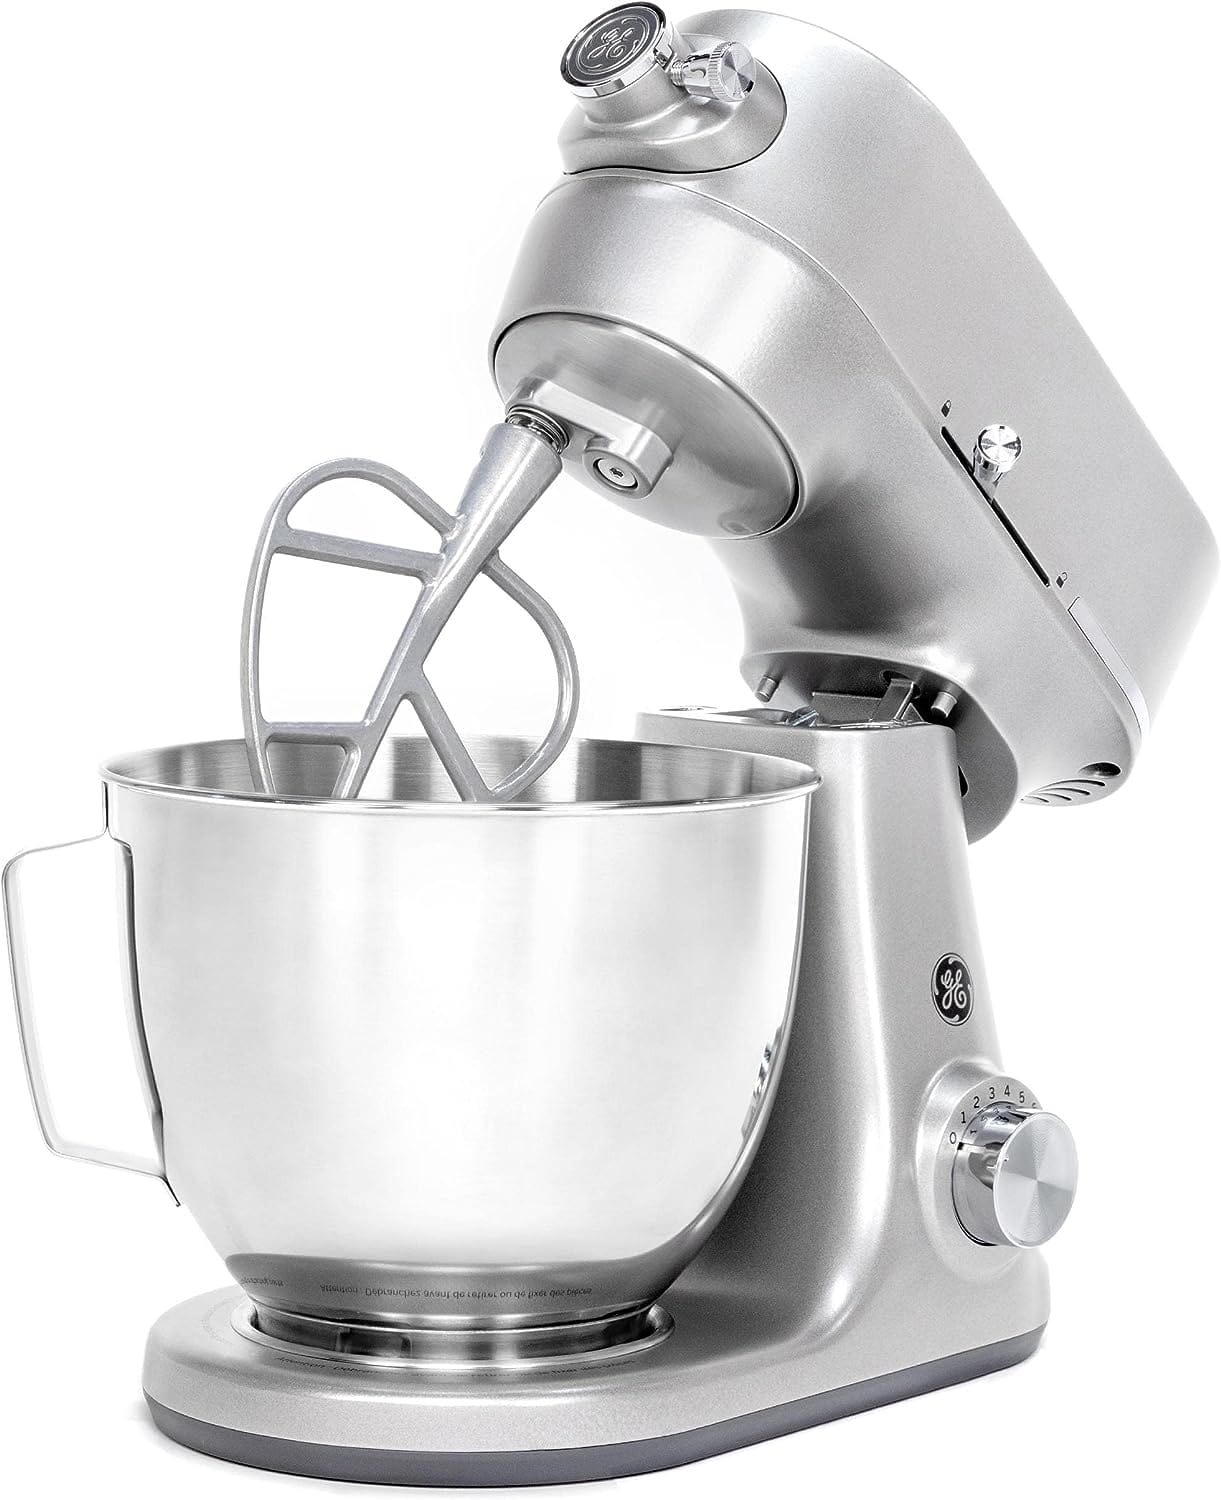 GE Tilt-Head Electric Stand Mixer | 7-Speed, 350-Watt Motor | Includes 5.3-Quart Bowl, Flat Beater, Dough Hook, Wire Whisk  Pouring Shield | Countertop Kitchen Essentials | Granite Gray